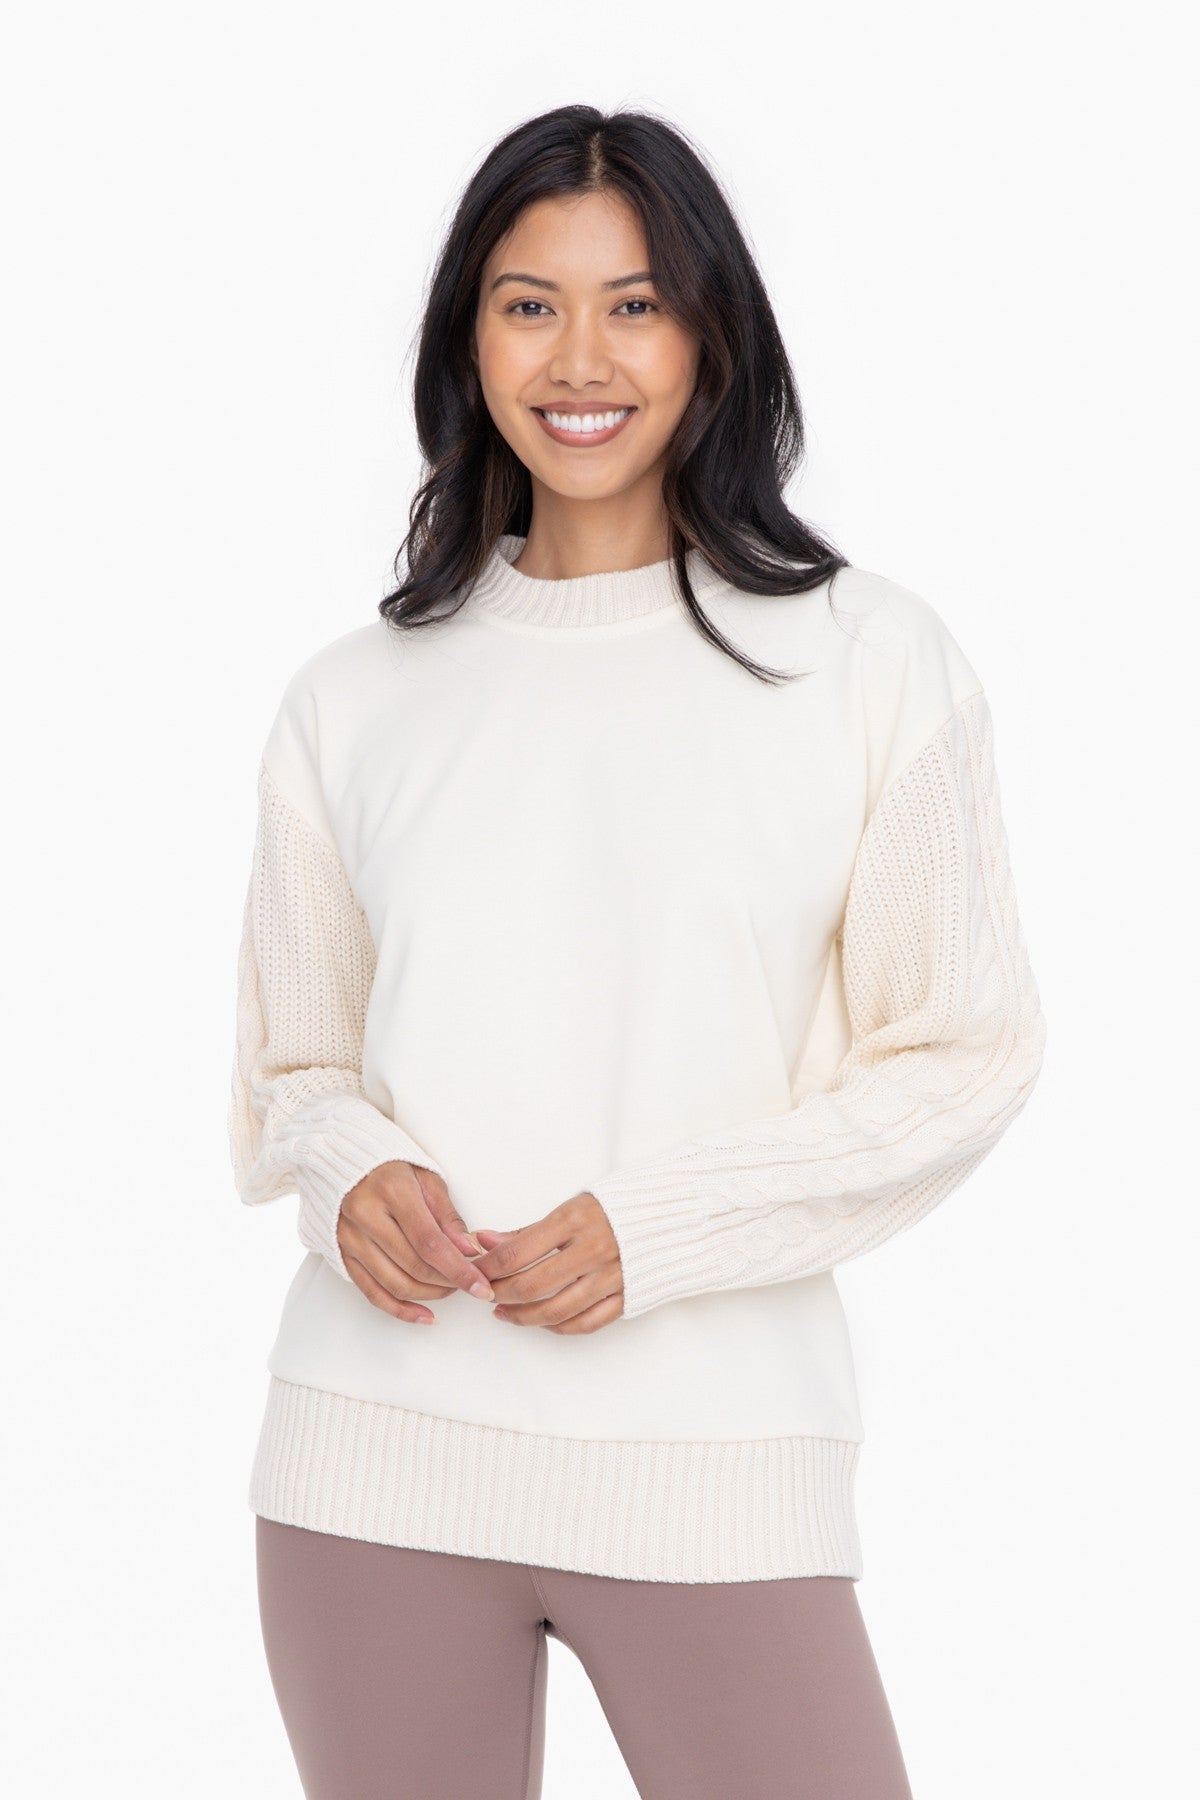 Hybrid Sweater by Mono B (2 colors)